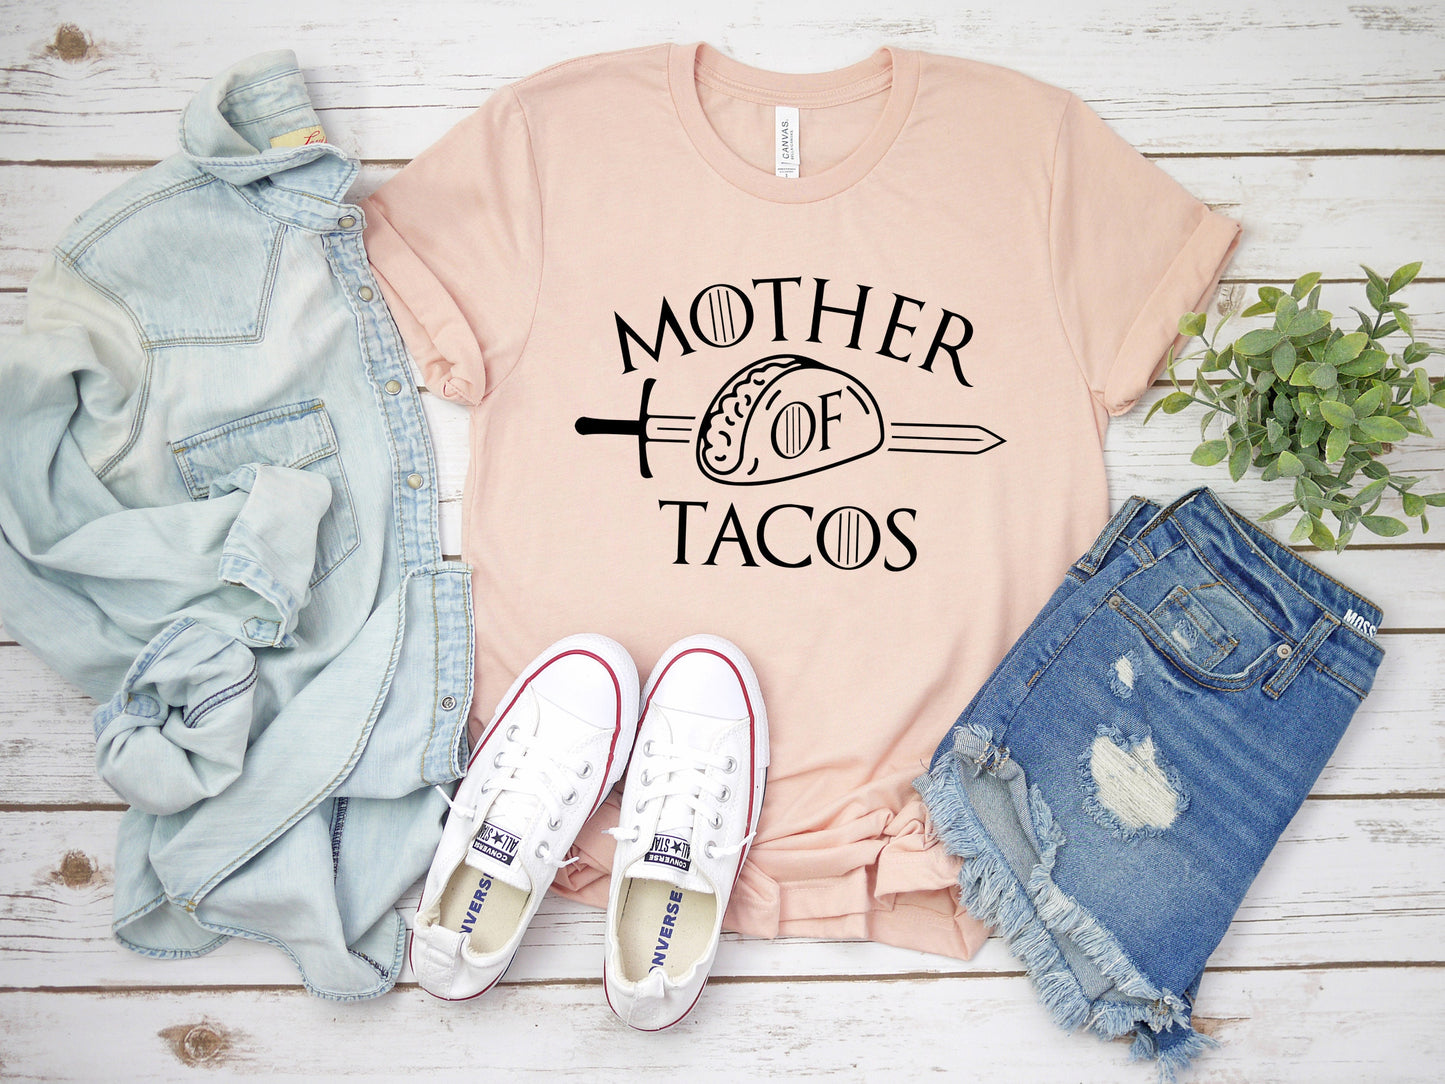 Mother of tacos gift t-shirt for mom or wife, taco lover t-shirt for women